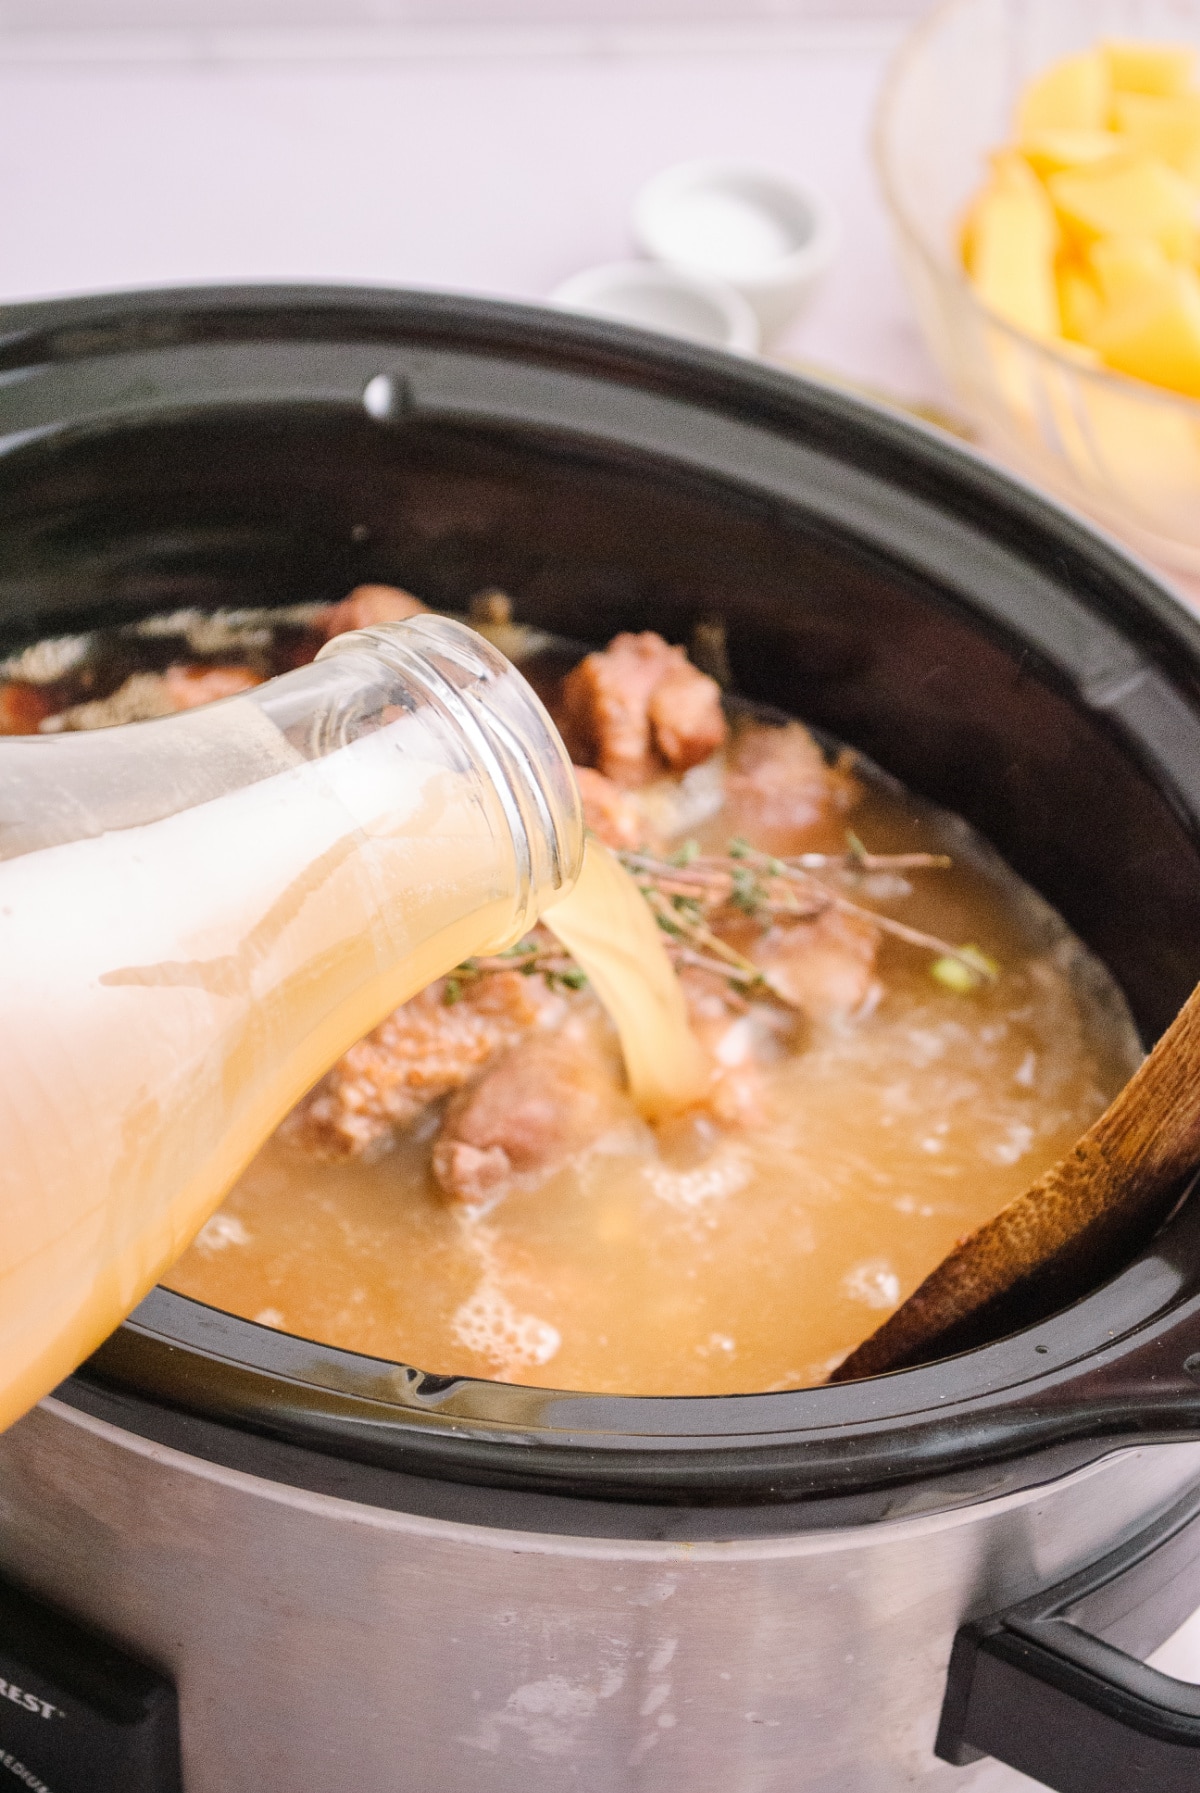 Slow cooker Guinness beef stew